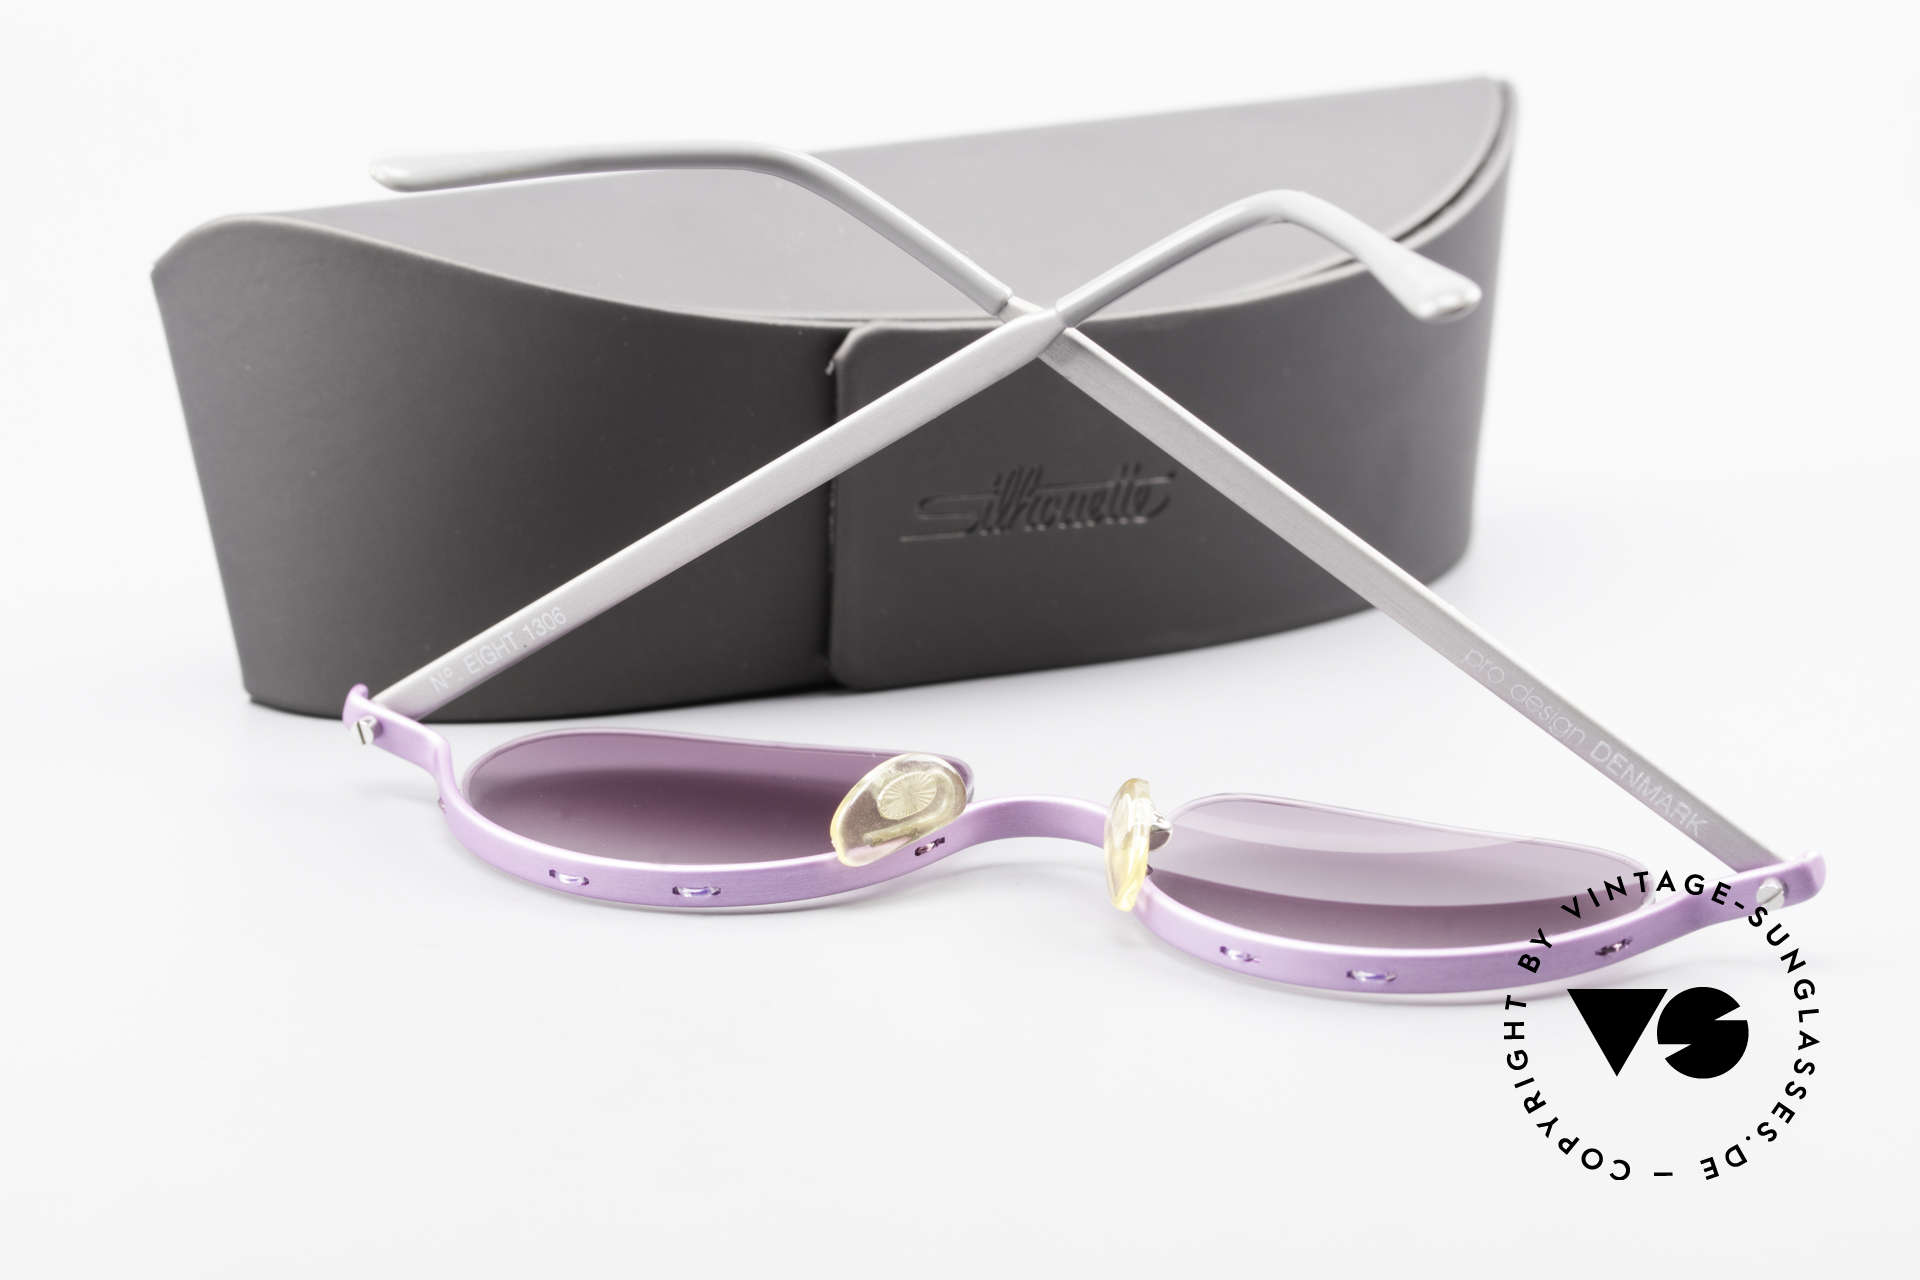 ProDesign No8 Gail Spence Design Shades, pink-purple-gradient sun lenses and Silhouette case, Made for Women